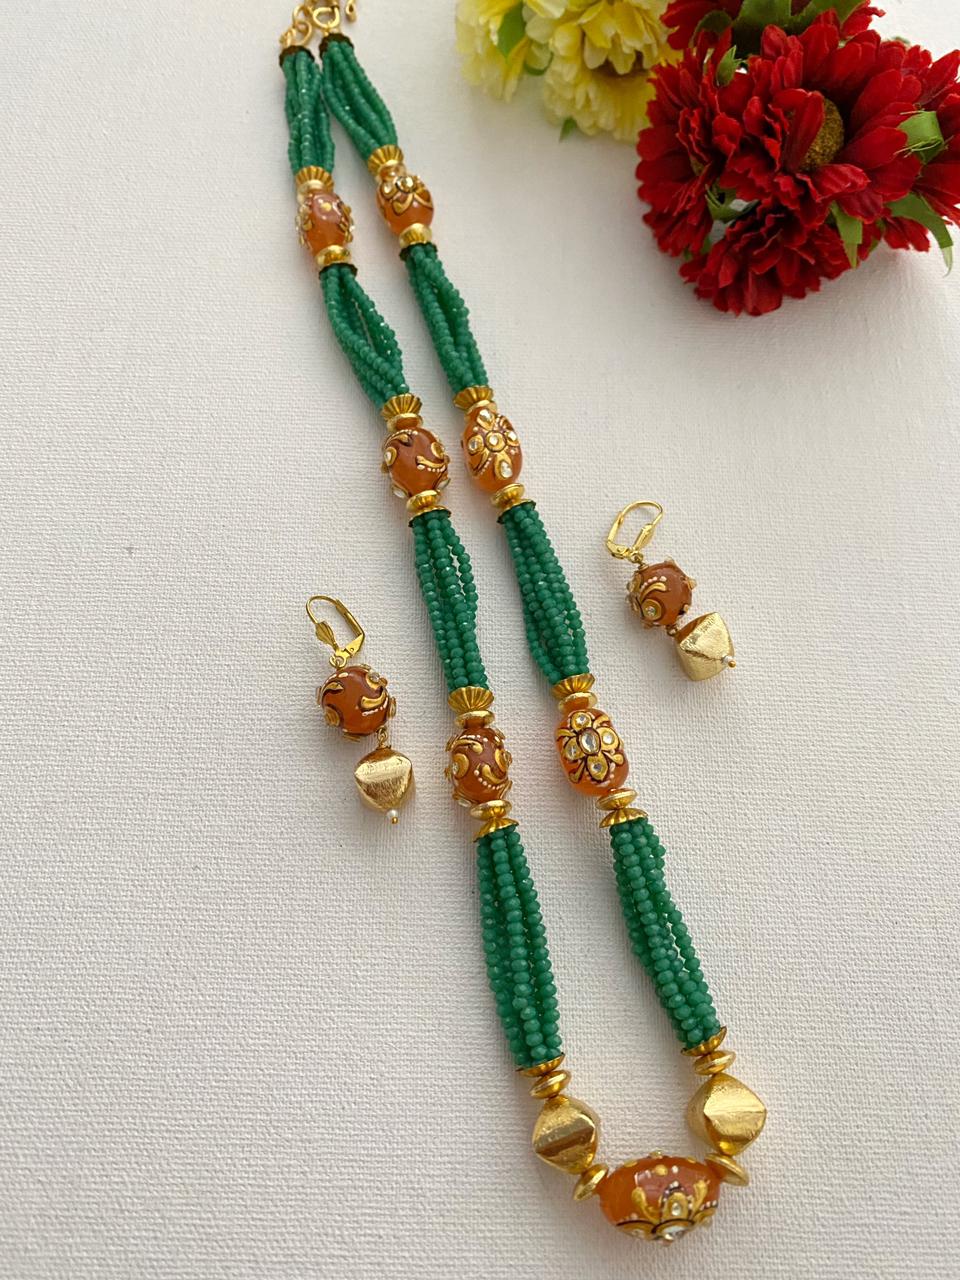 Designer Handcrafted Long Sea Green Crystal Beaded Necklace Set By Gehna Shop Beads Jewellery